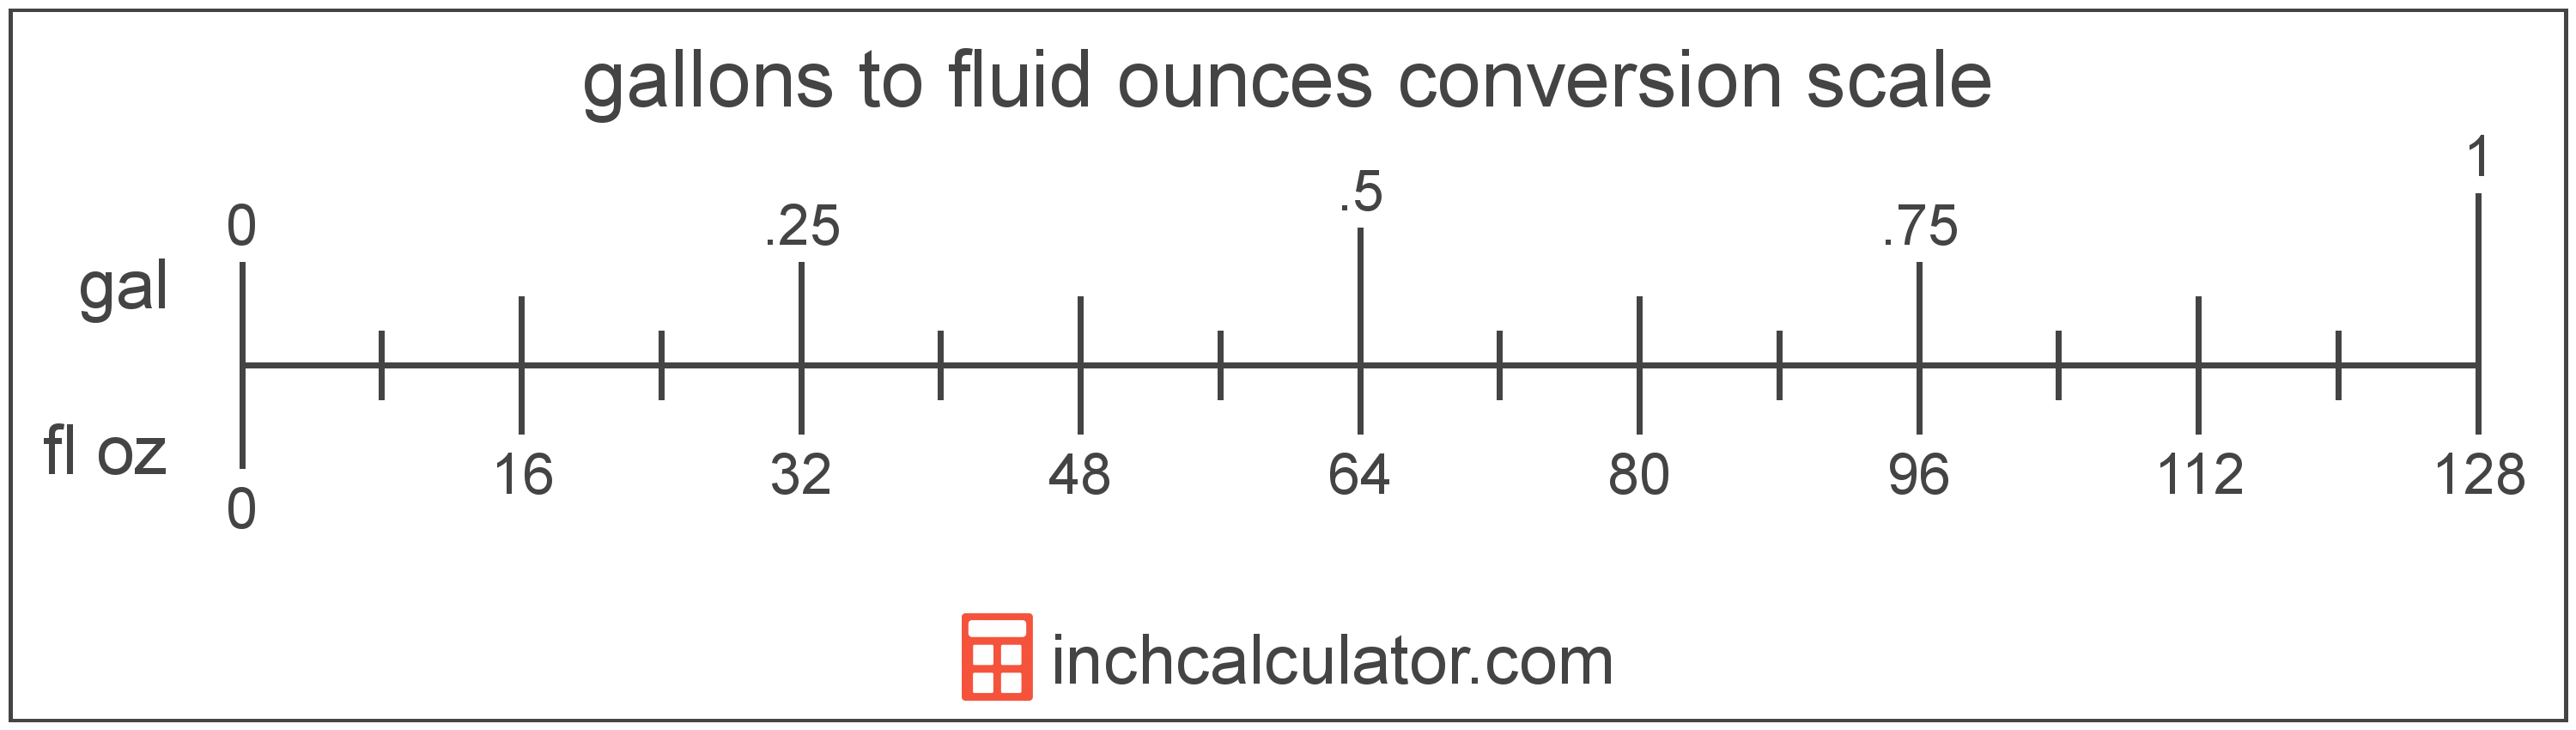 conversion scale showing fluid ounces and equivalent gallons volume values